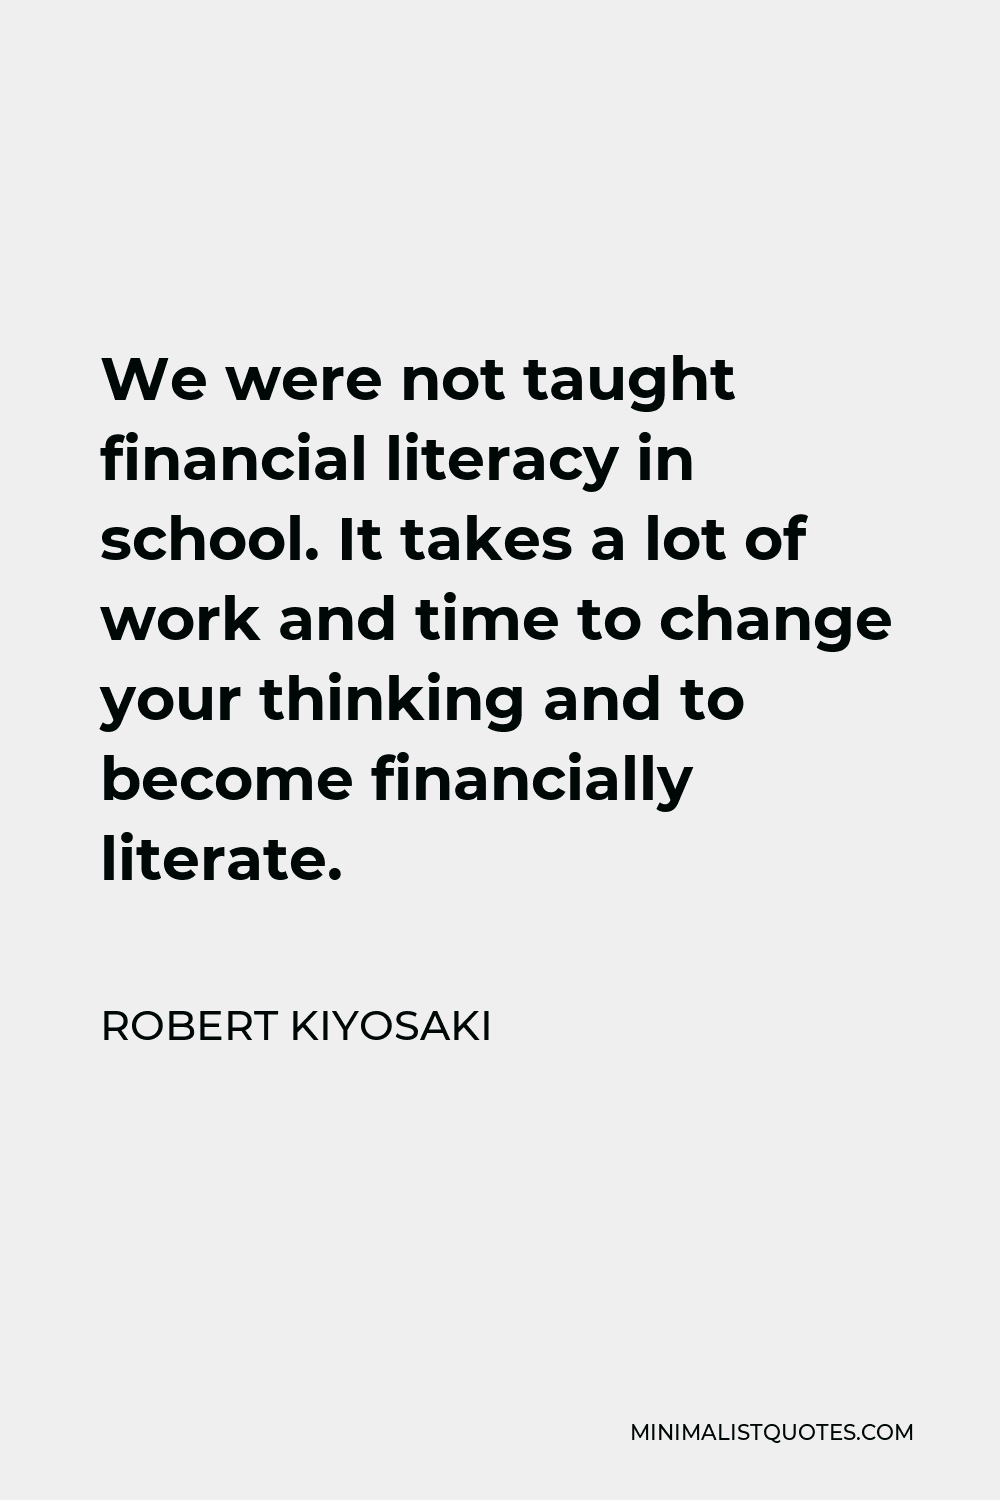 Robert Kiyosaki Quote - We were not taught financial literacy in school. It takes a lot of work and time to change your thinking and to become financially literate.